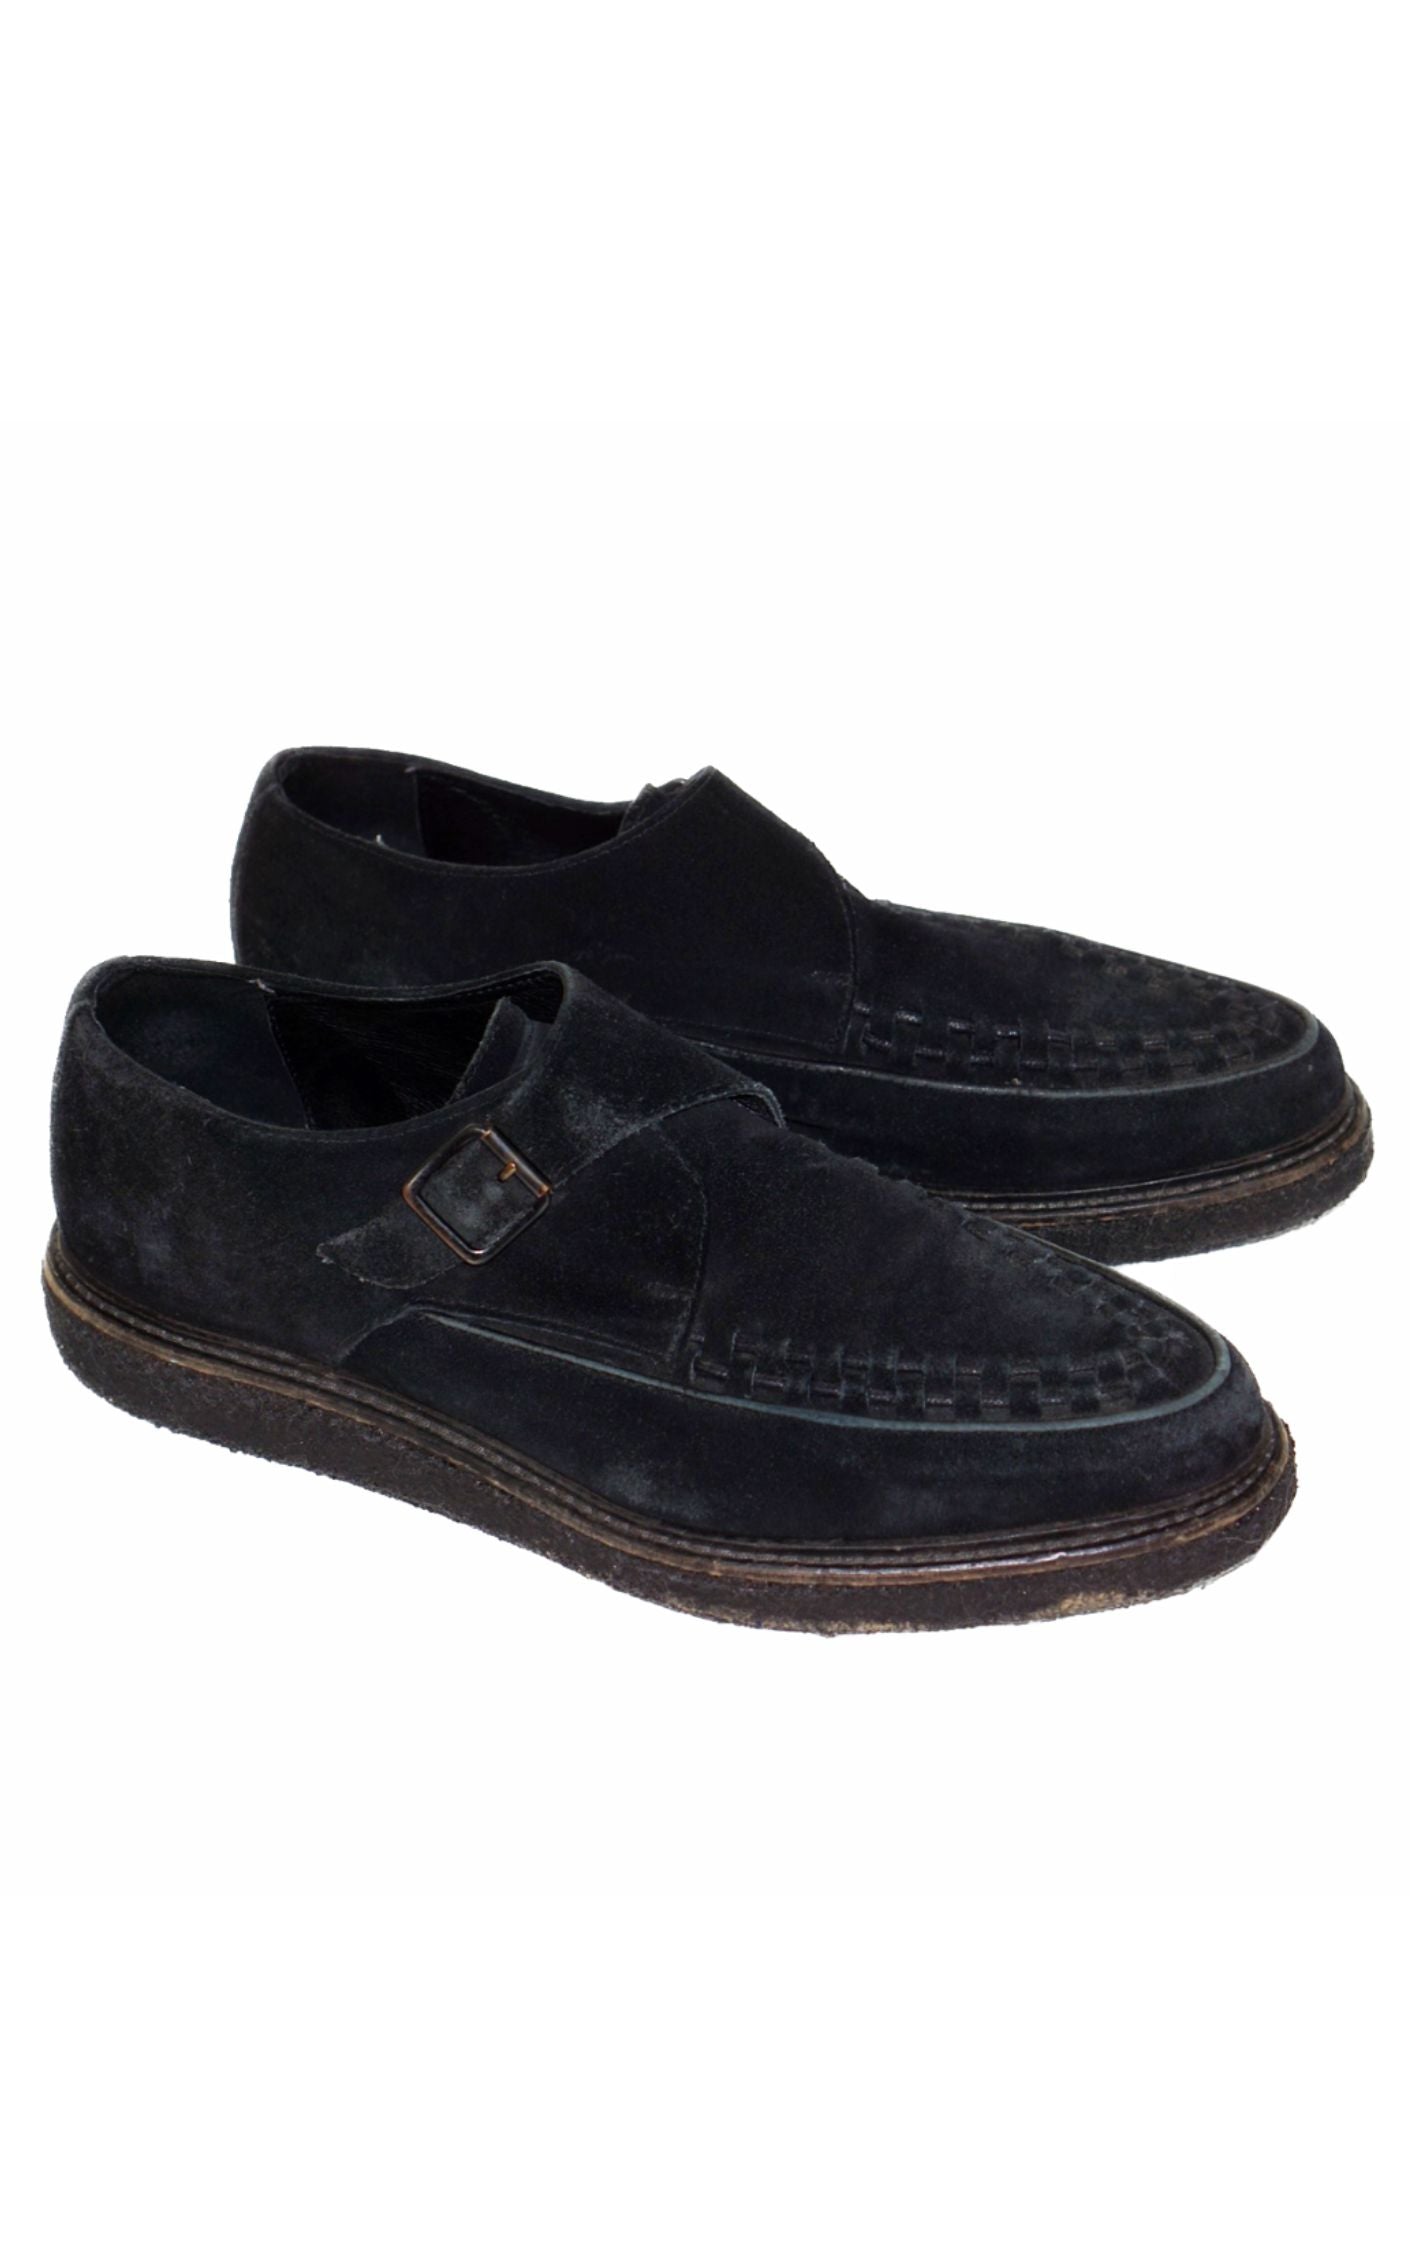 ALLSAINTS Rollin Suede Creepers Loafers resellum